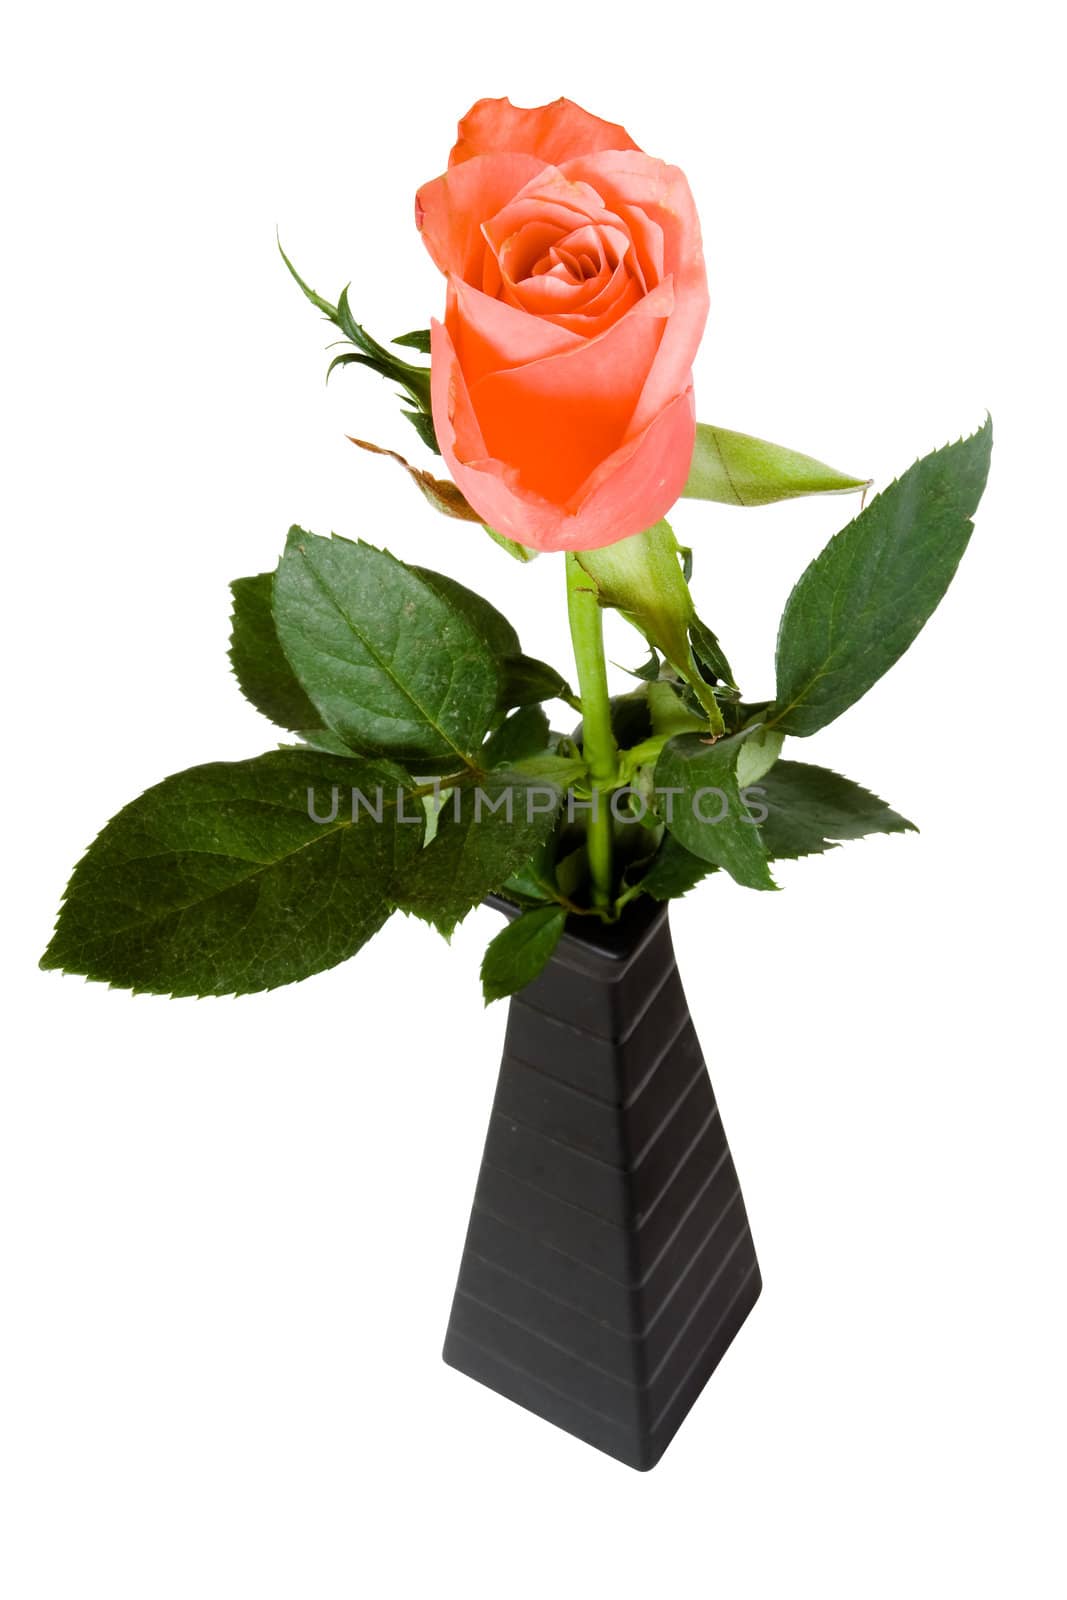 Pink rose in black vase isolated on white. Clipping path included.